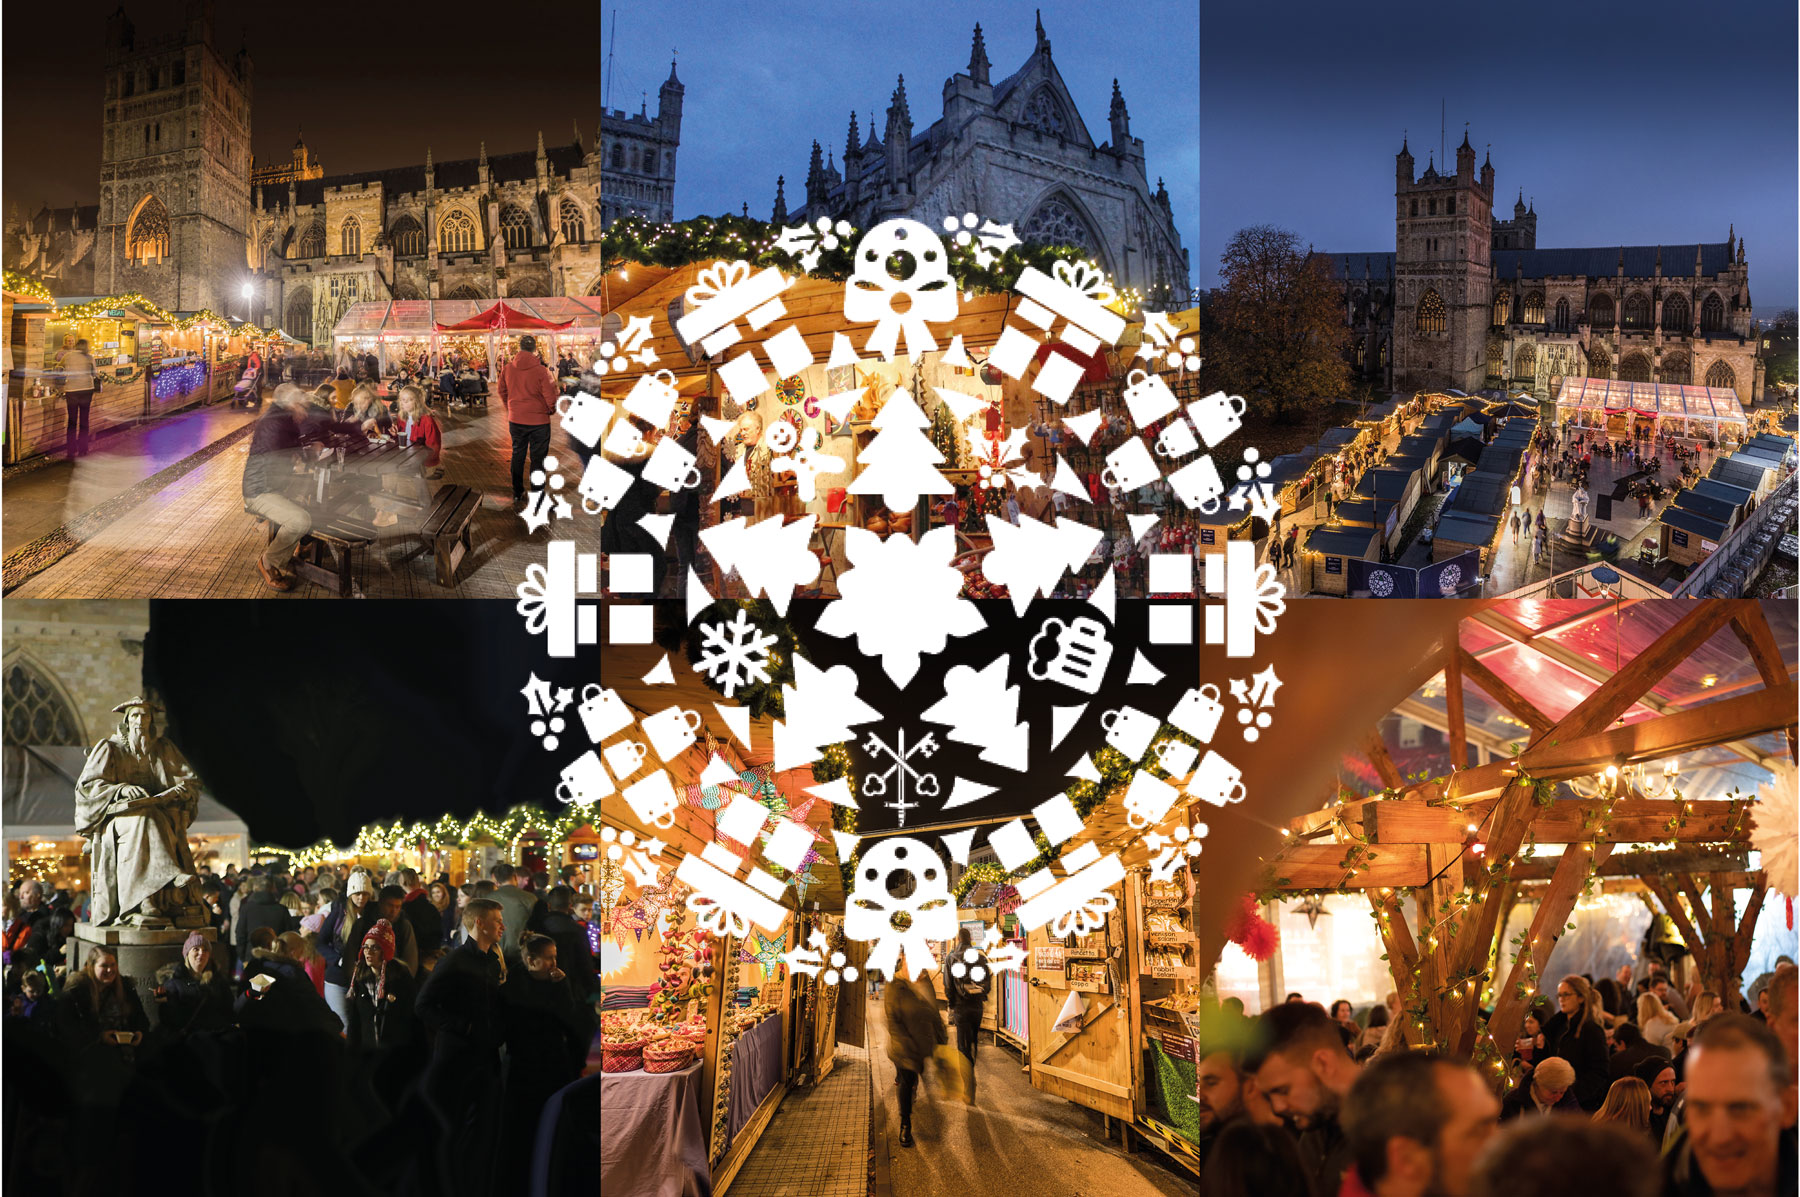 Exeter Cathedral's Christmas Market Brings In £33 Million